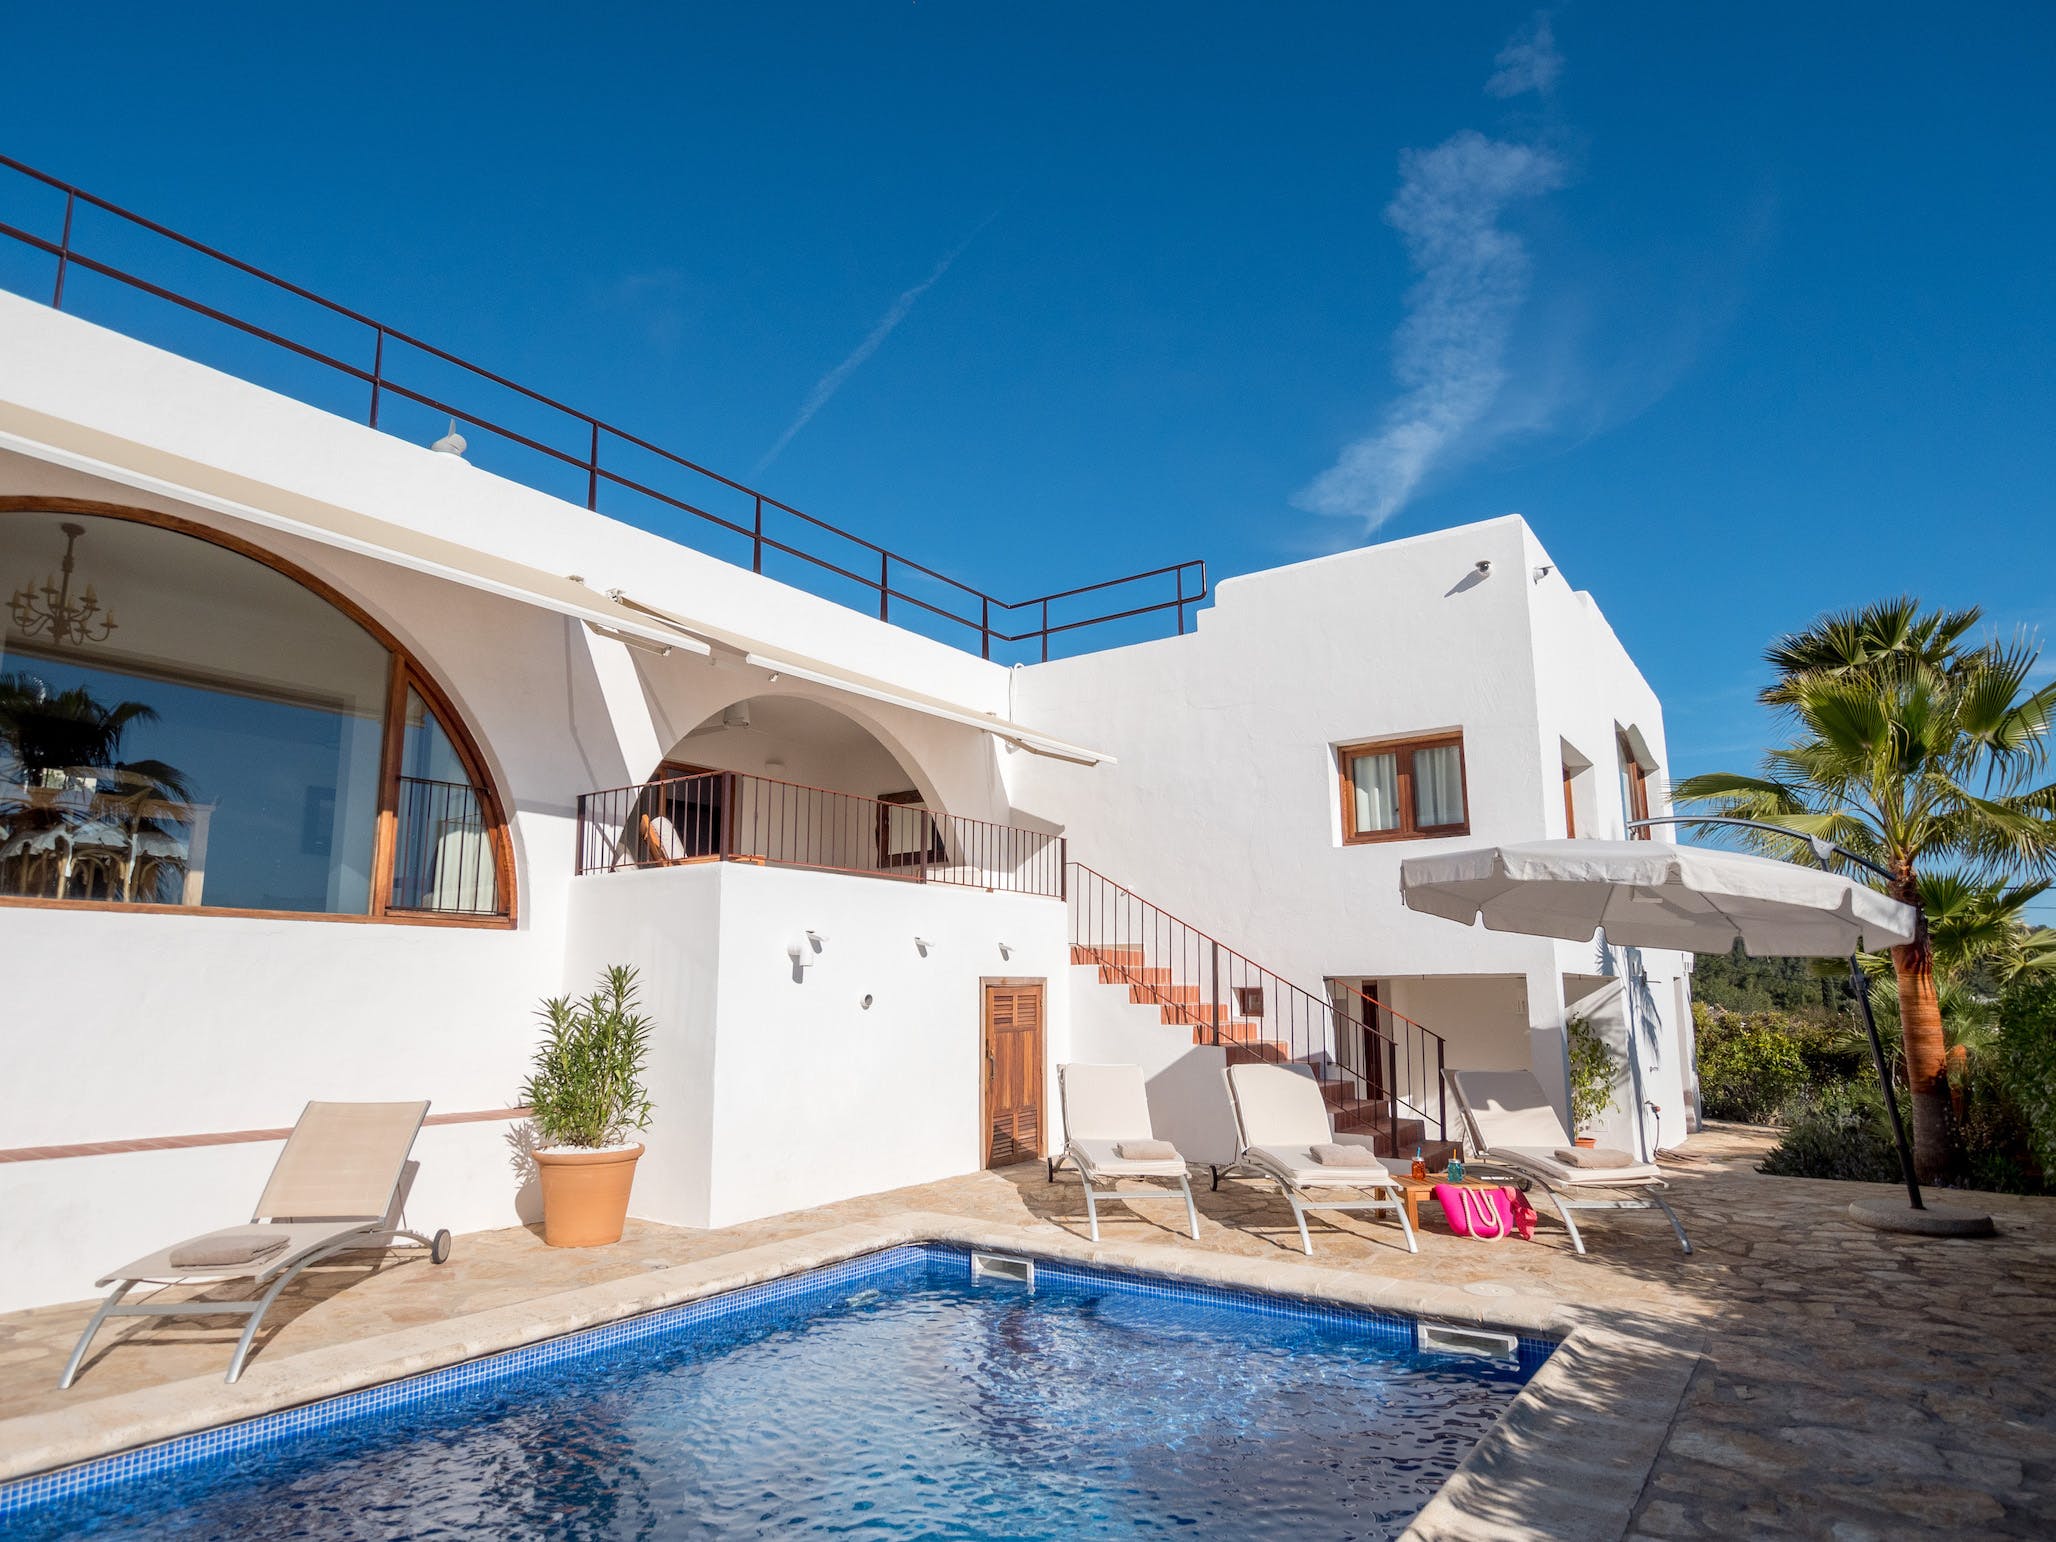 You are currently viewing Can Cortez – ‘Very nice recently refurbished villa with amazing Dalt Vila and sea views.’